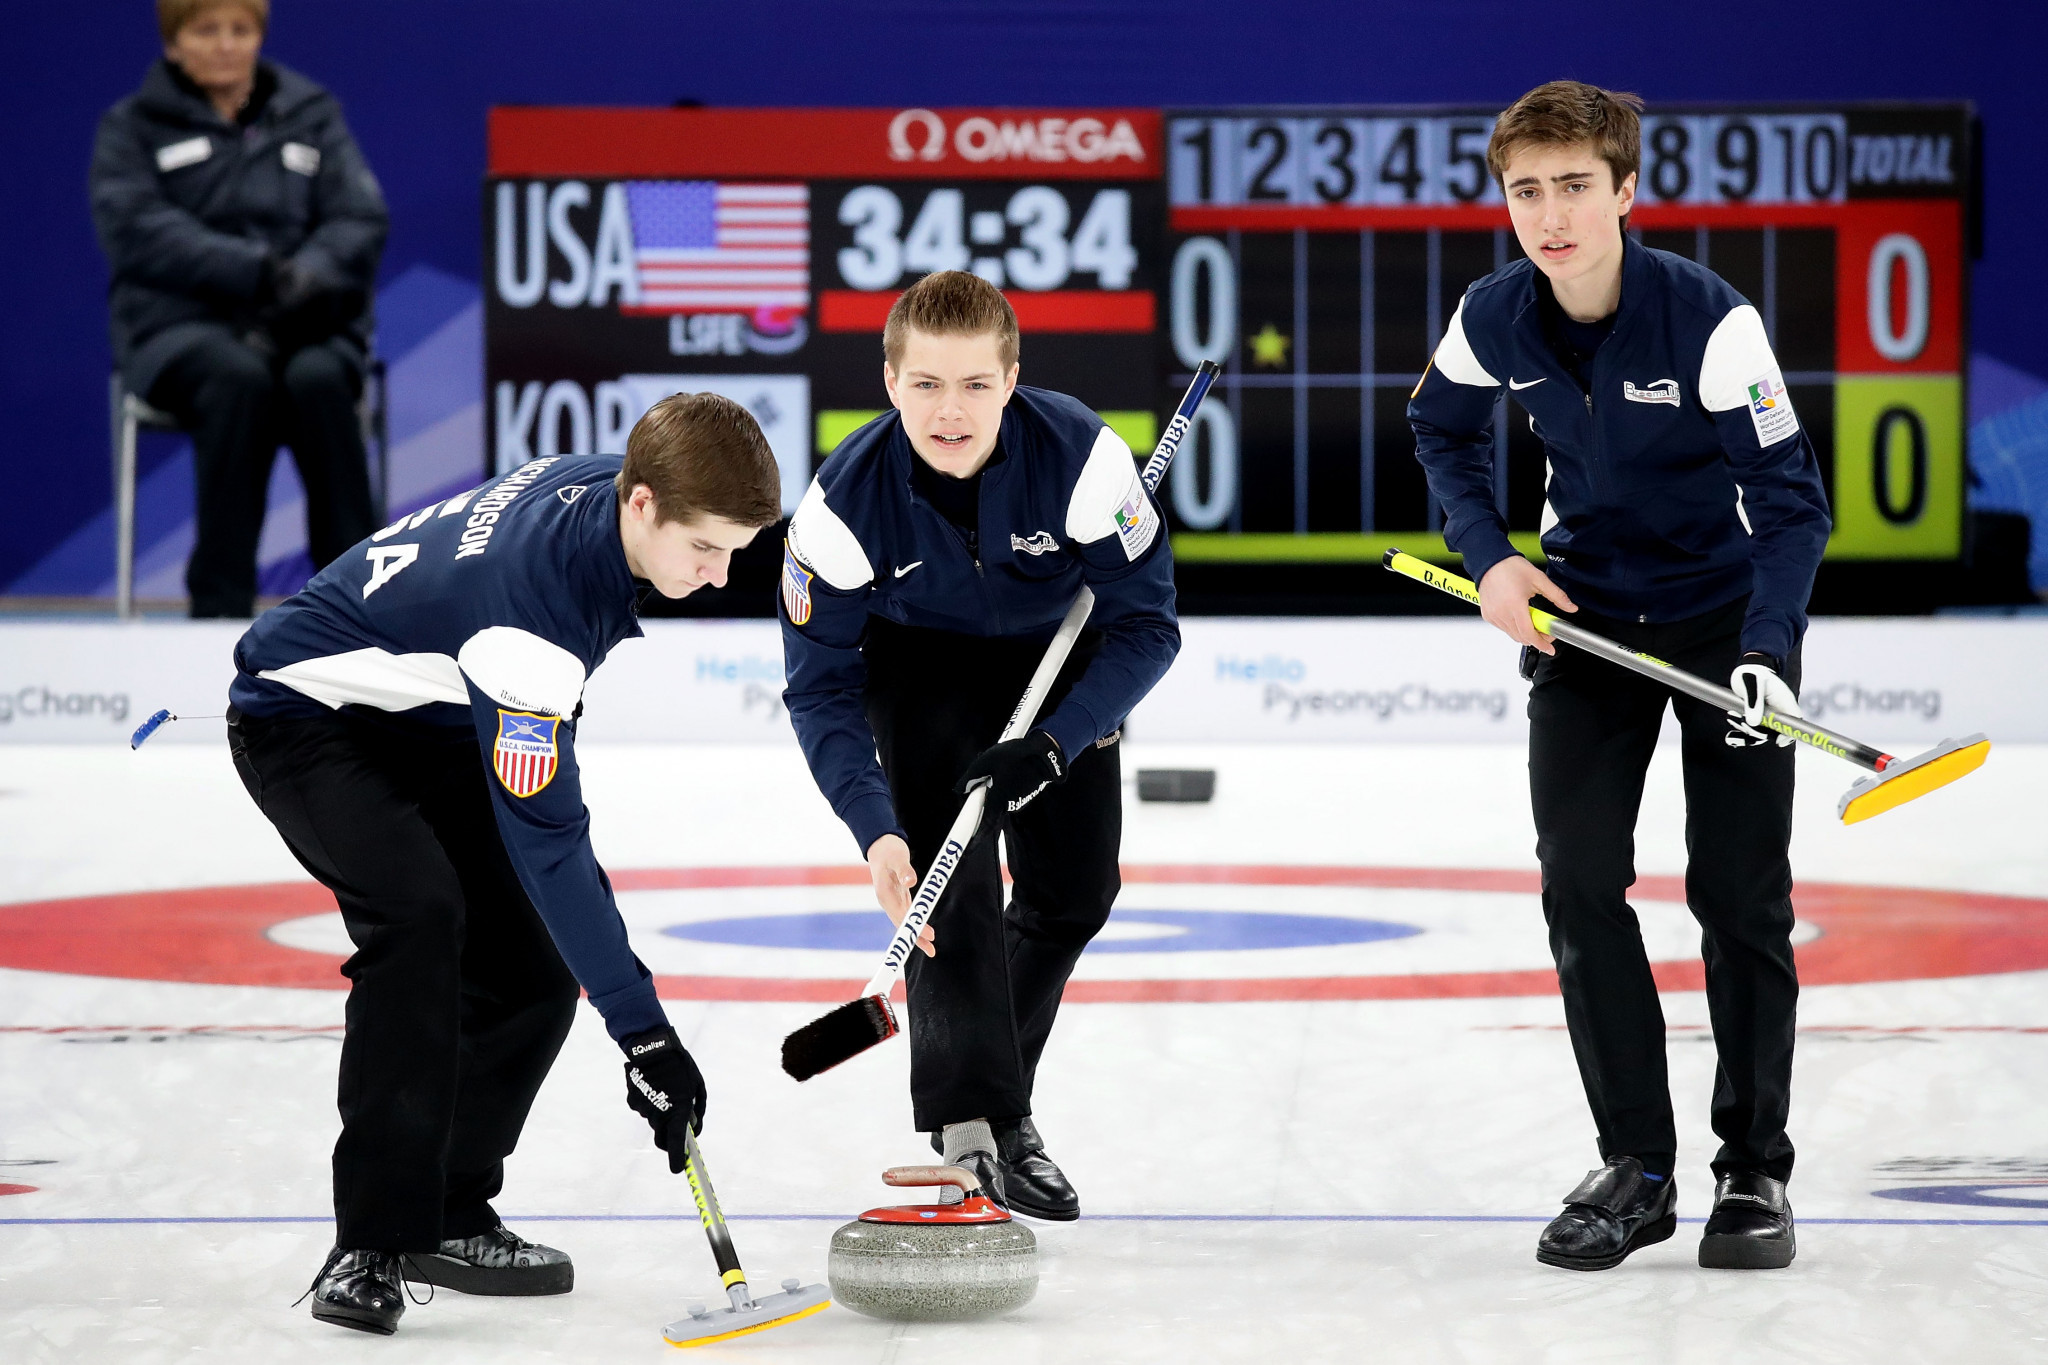 US aiming for double curling podium at Lake Placid 2023 Winter World University Games